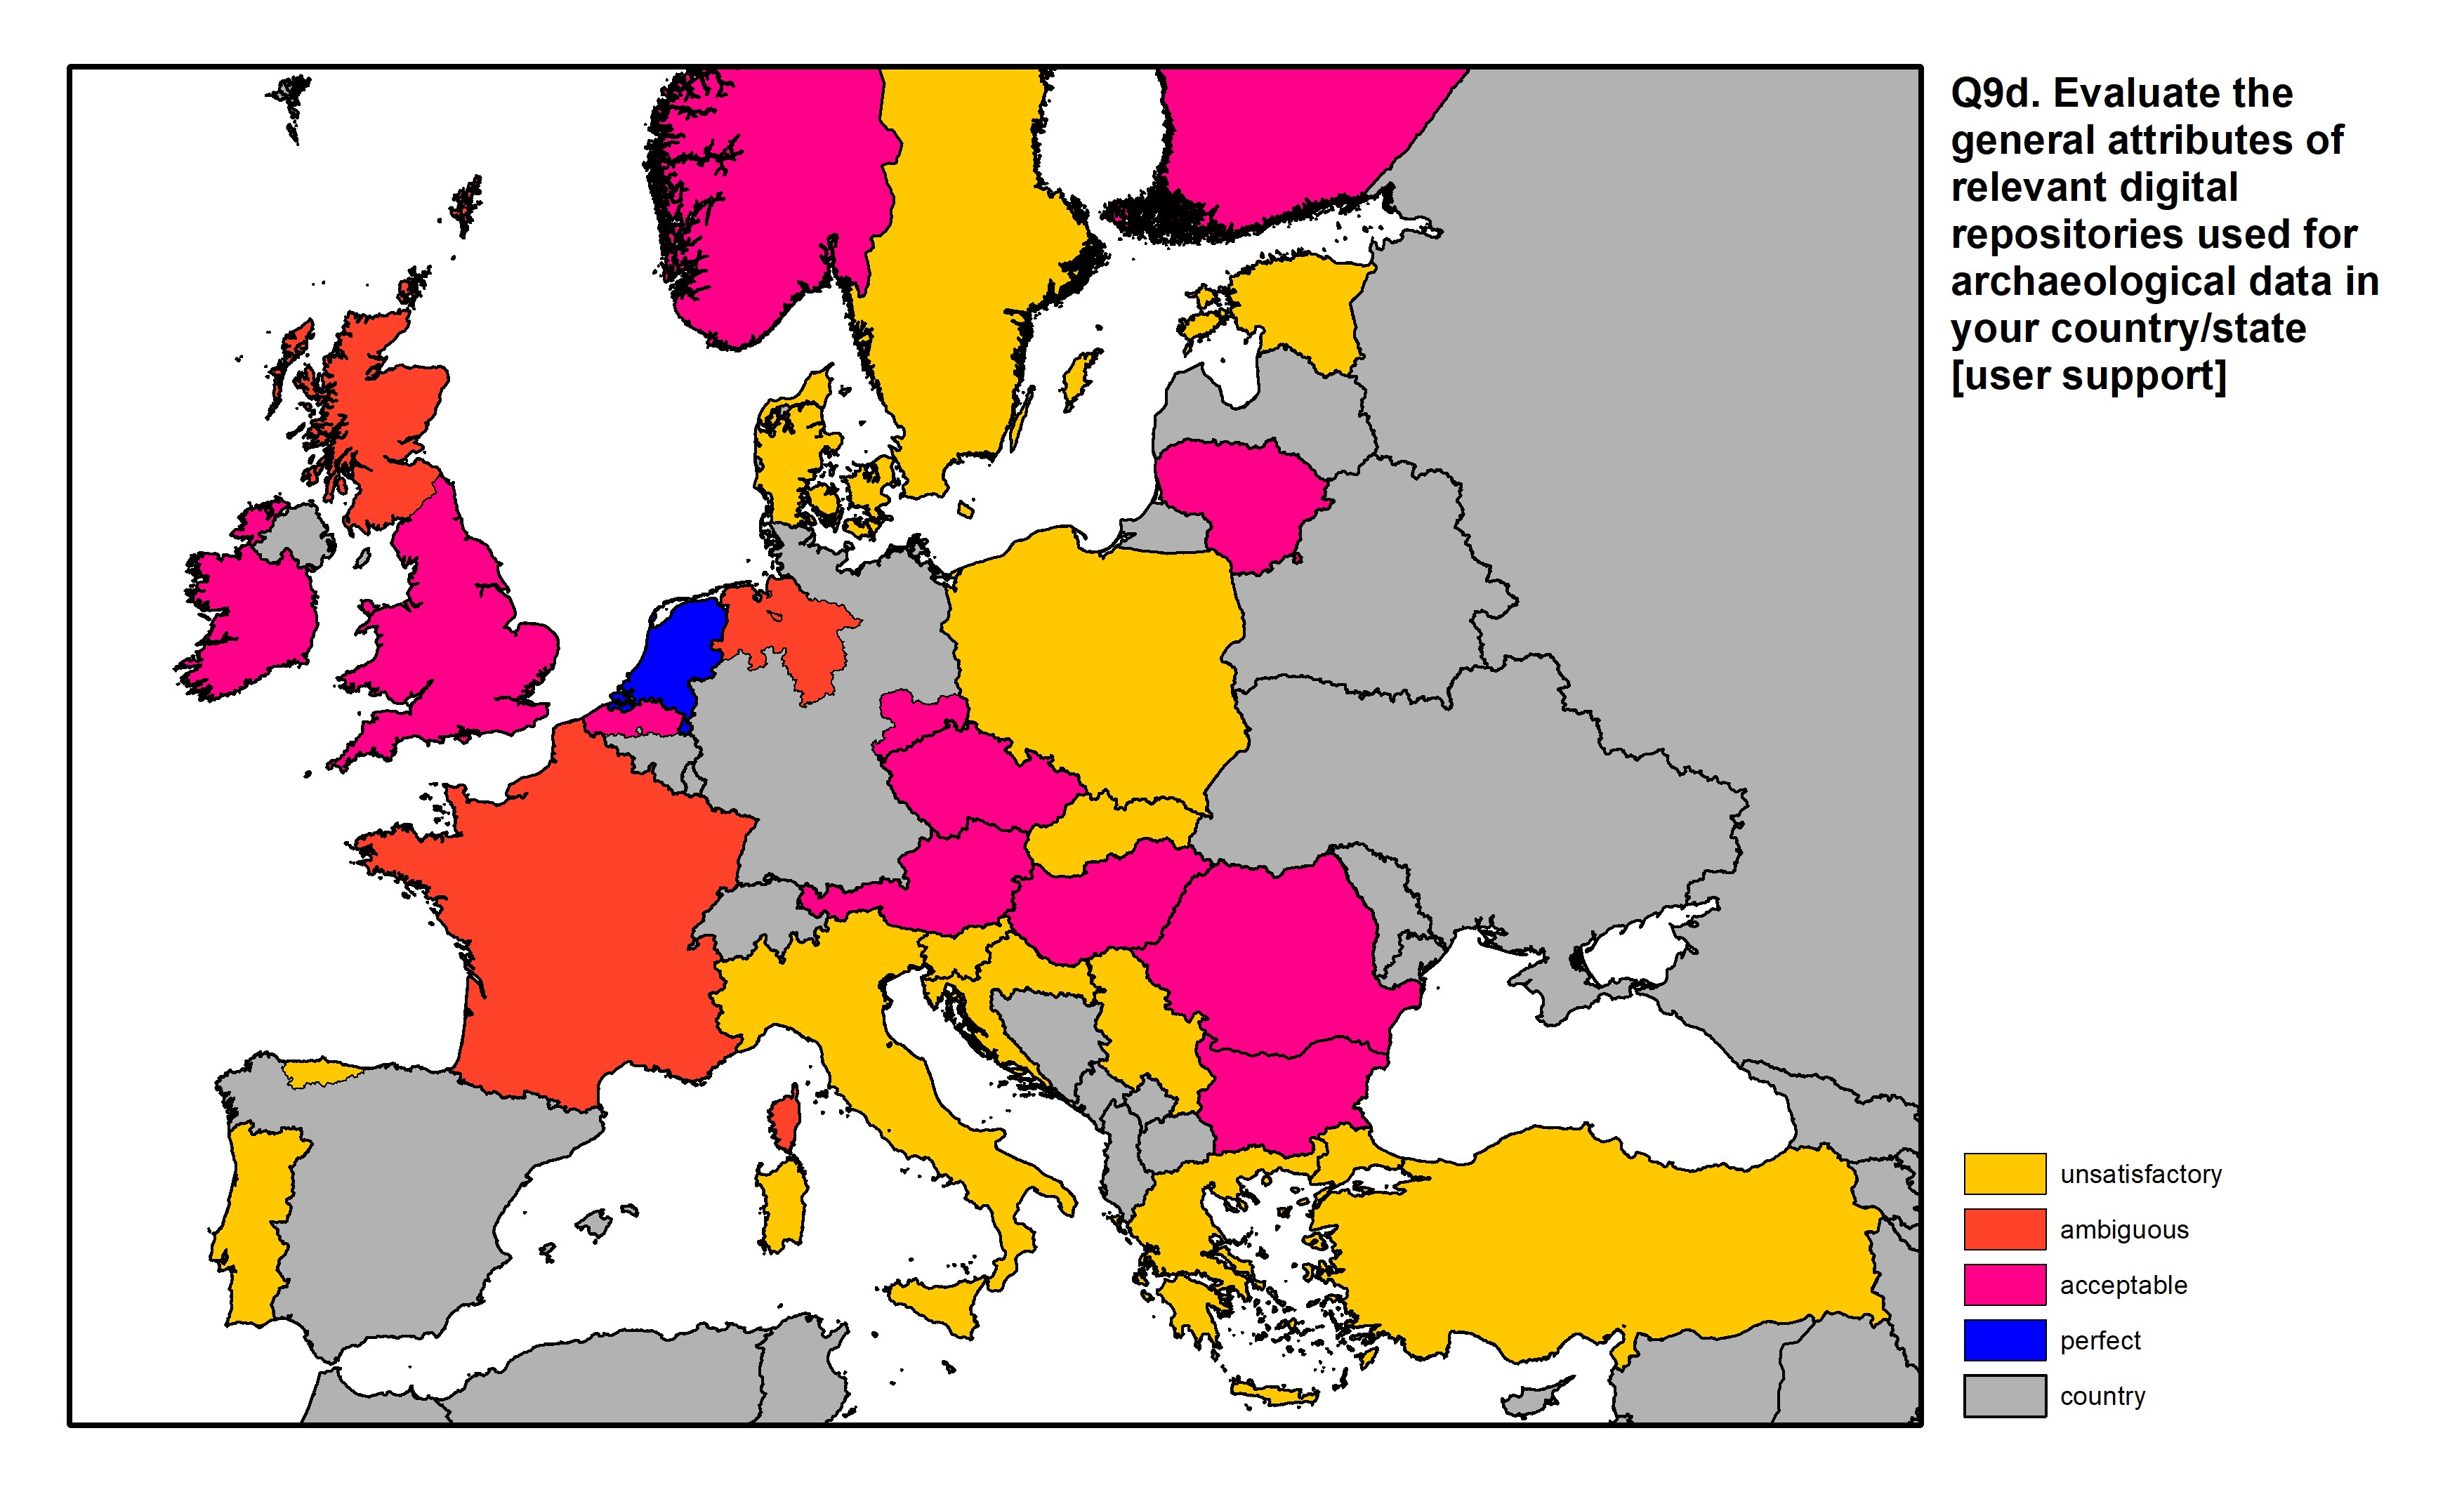 Figure 30: a map of Europe showing countries and regions in colour based on response rates to the survey question.